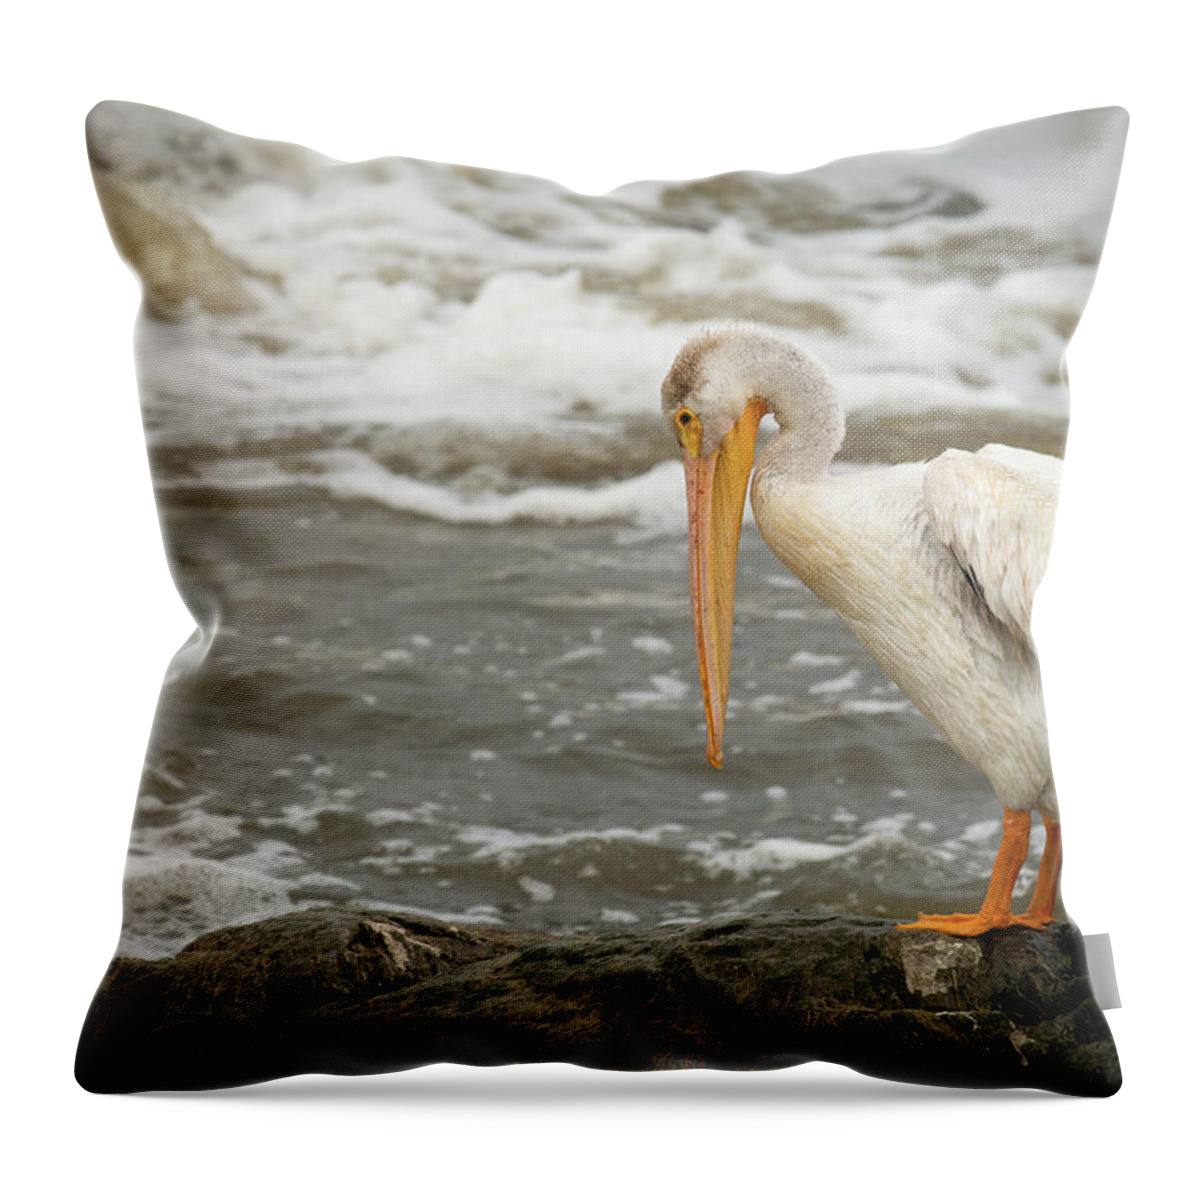 Animal Throw Pillow featuring the photograph Pelican Posing by Paul Freidlund